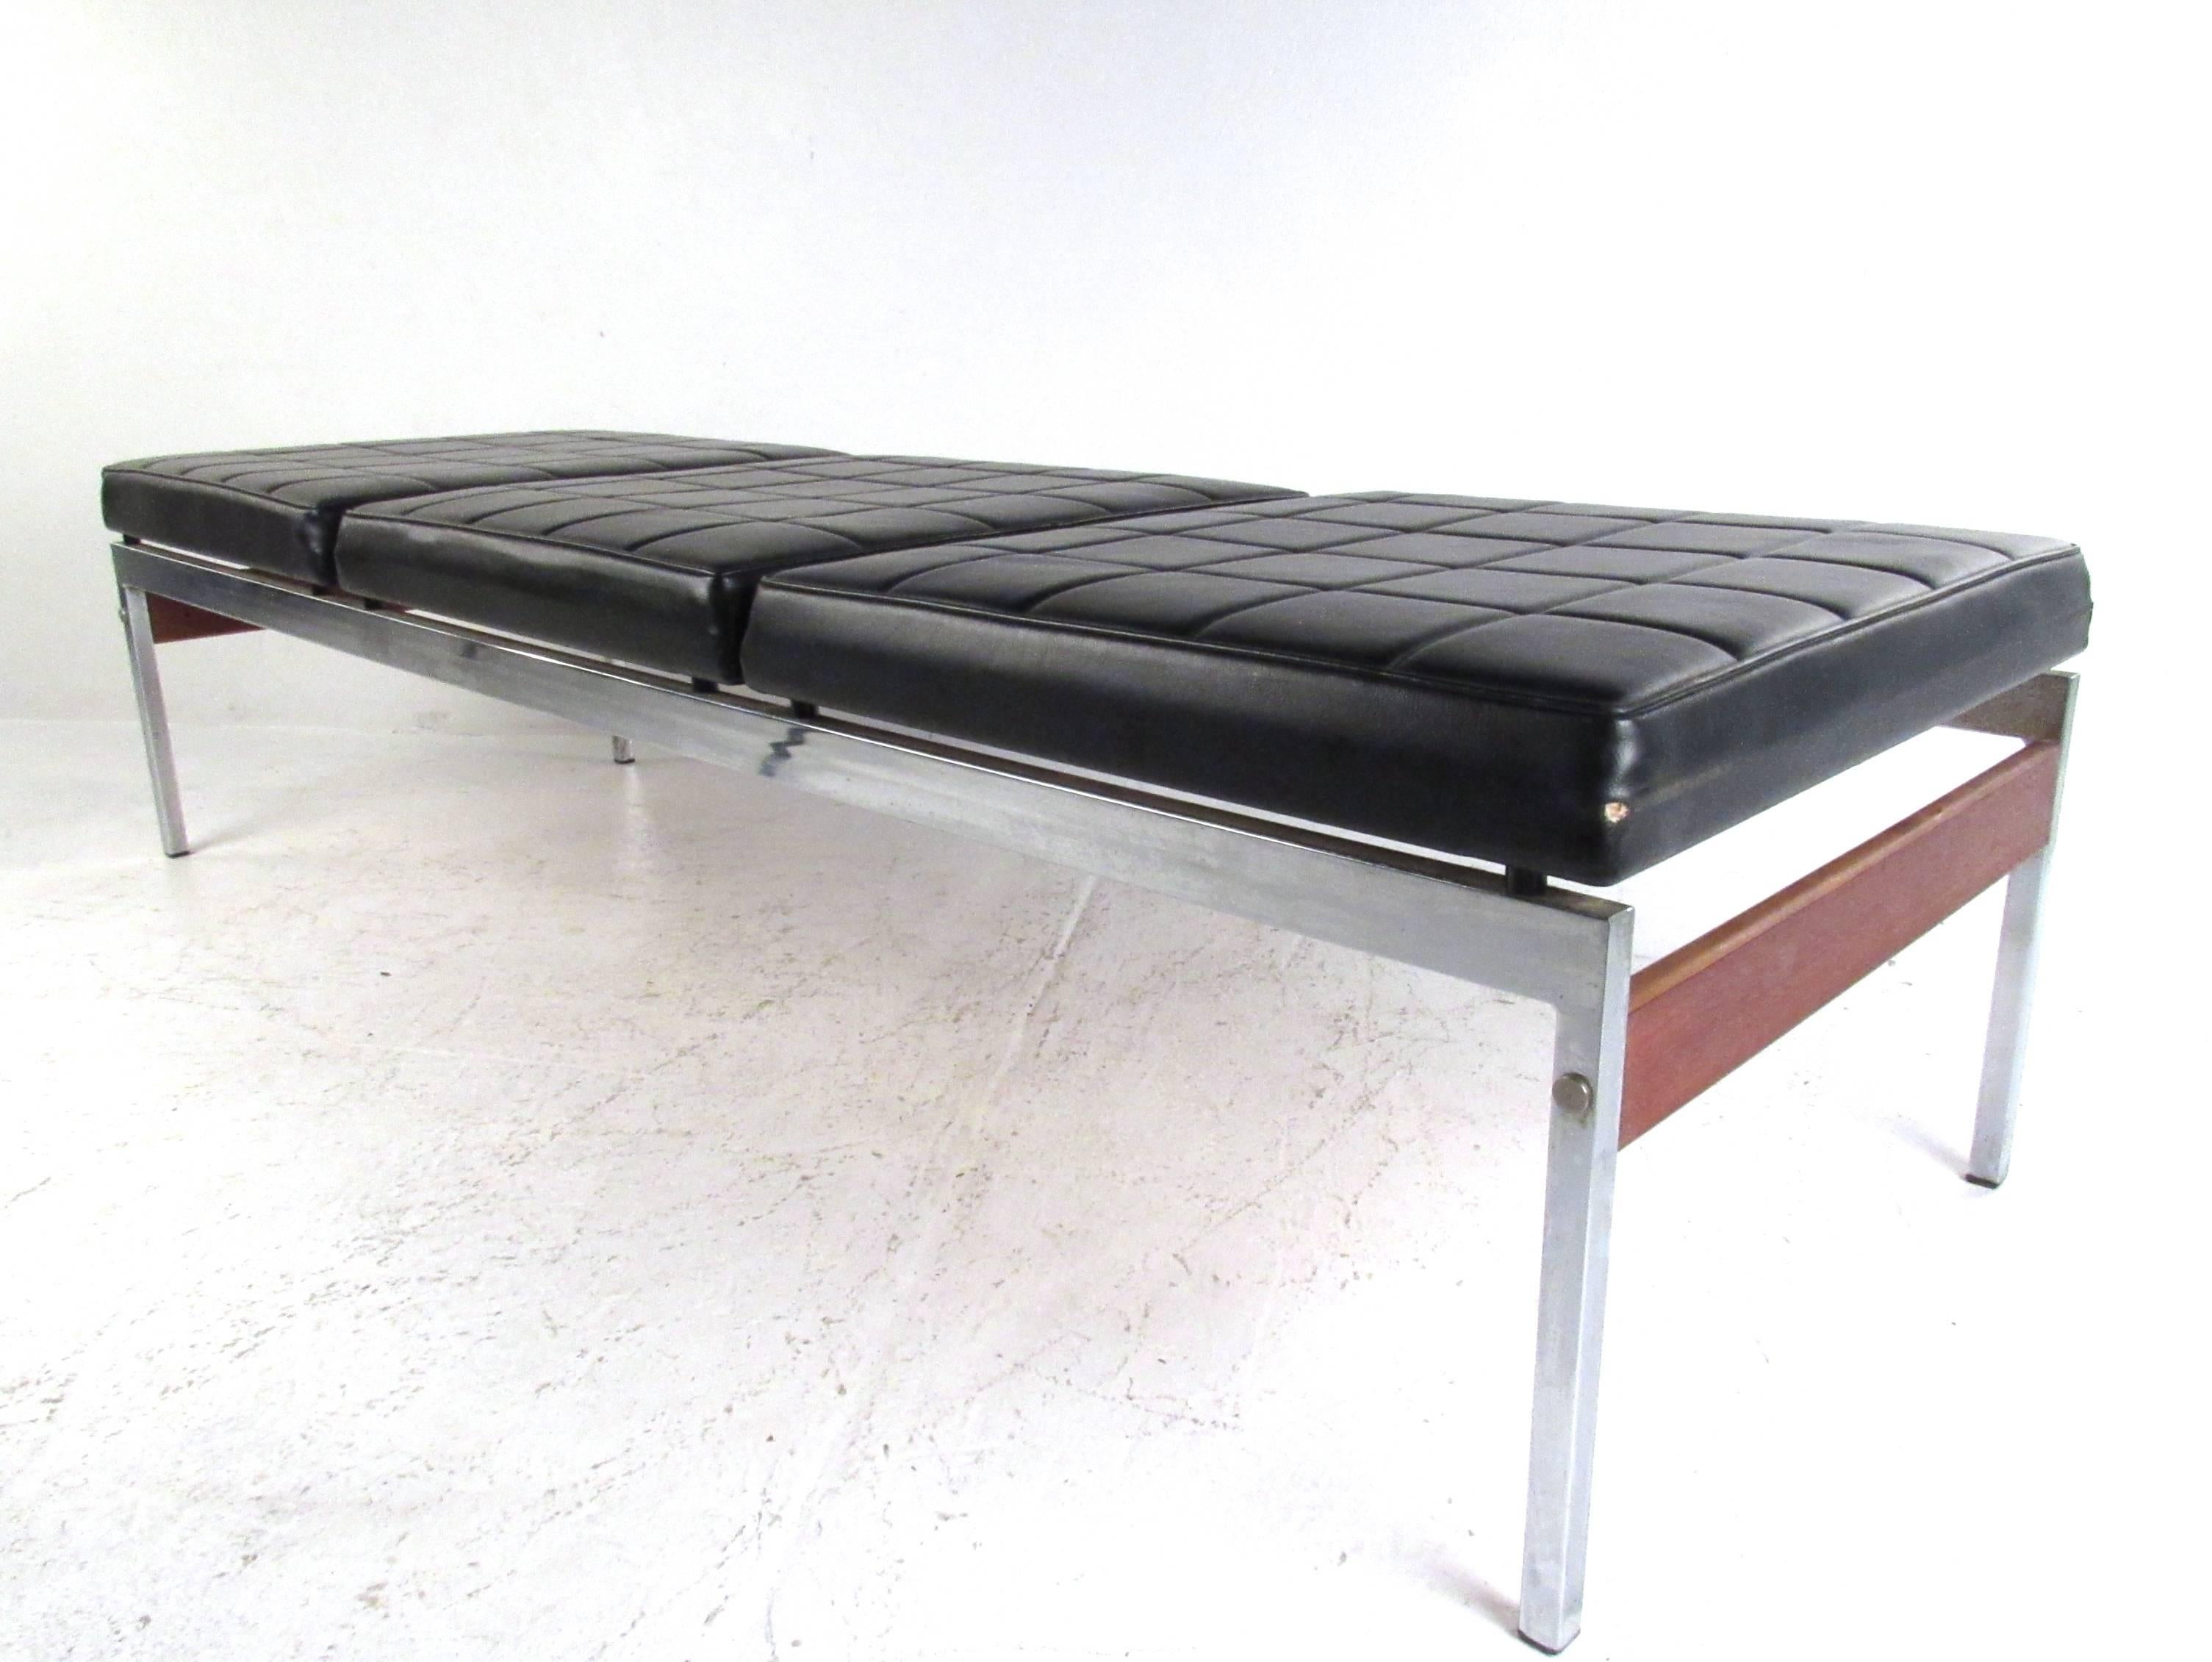 This unique Mid-Century bench features three comfortably upholstered seats mounted on a sturdy chrome finish frame. Cross work stitching on the vinyl adds to the design of the piece while the vintage hardwood side stretchers add stability and style.